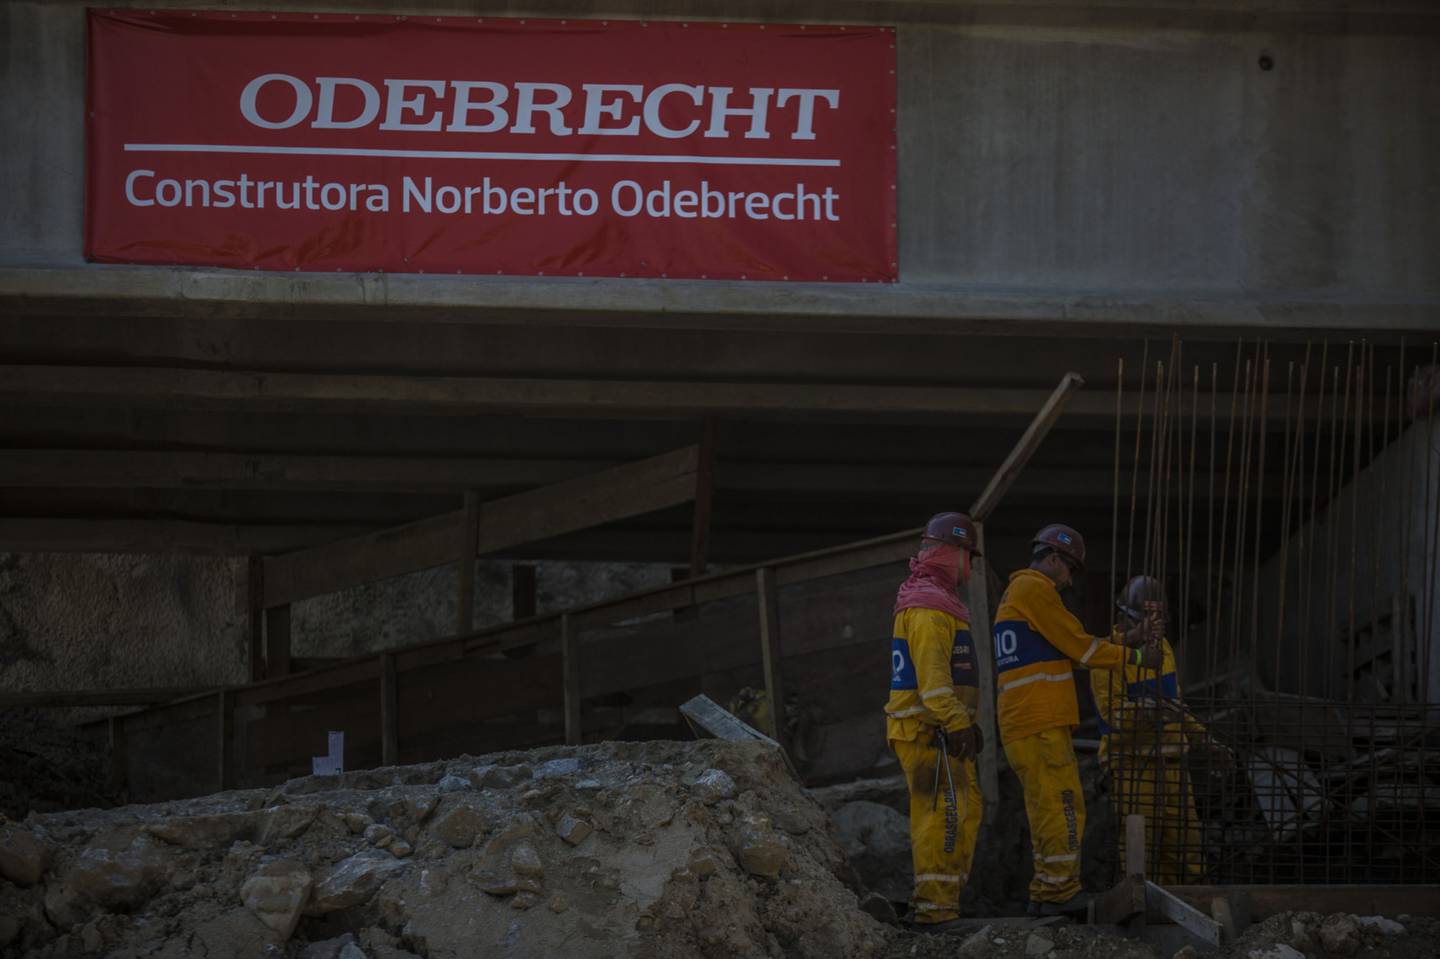 Odebrecht S.A. signage is displayed as contractors work on a construction site in the Barra da Tijuca neighborhood of Rio de Janeiro.